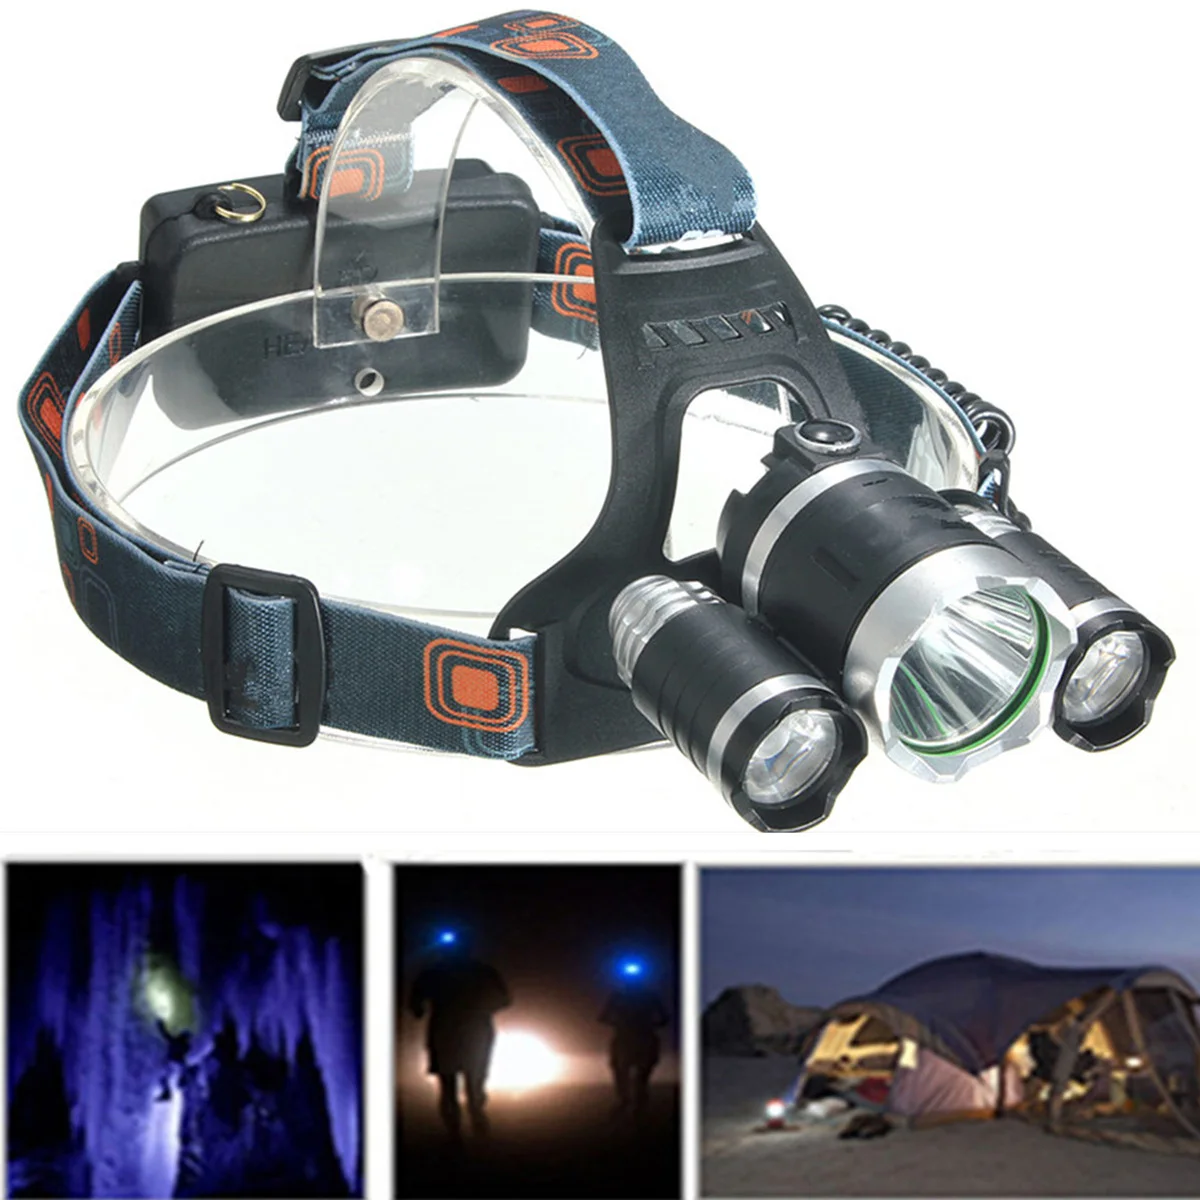 Jiguoor Rechargeable Headlamp Headlight Torch 5000LM XM-L T6 LED For Camping Hunting Fishing Head Torch Light by 18650 Battery